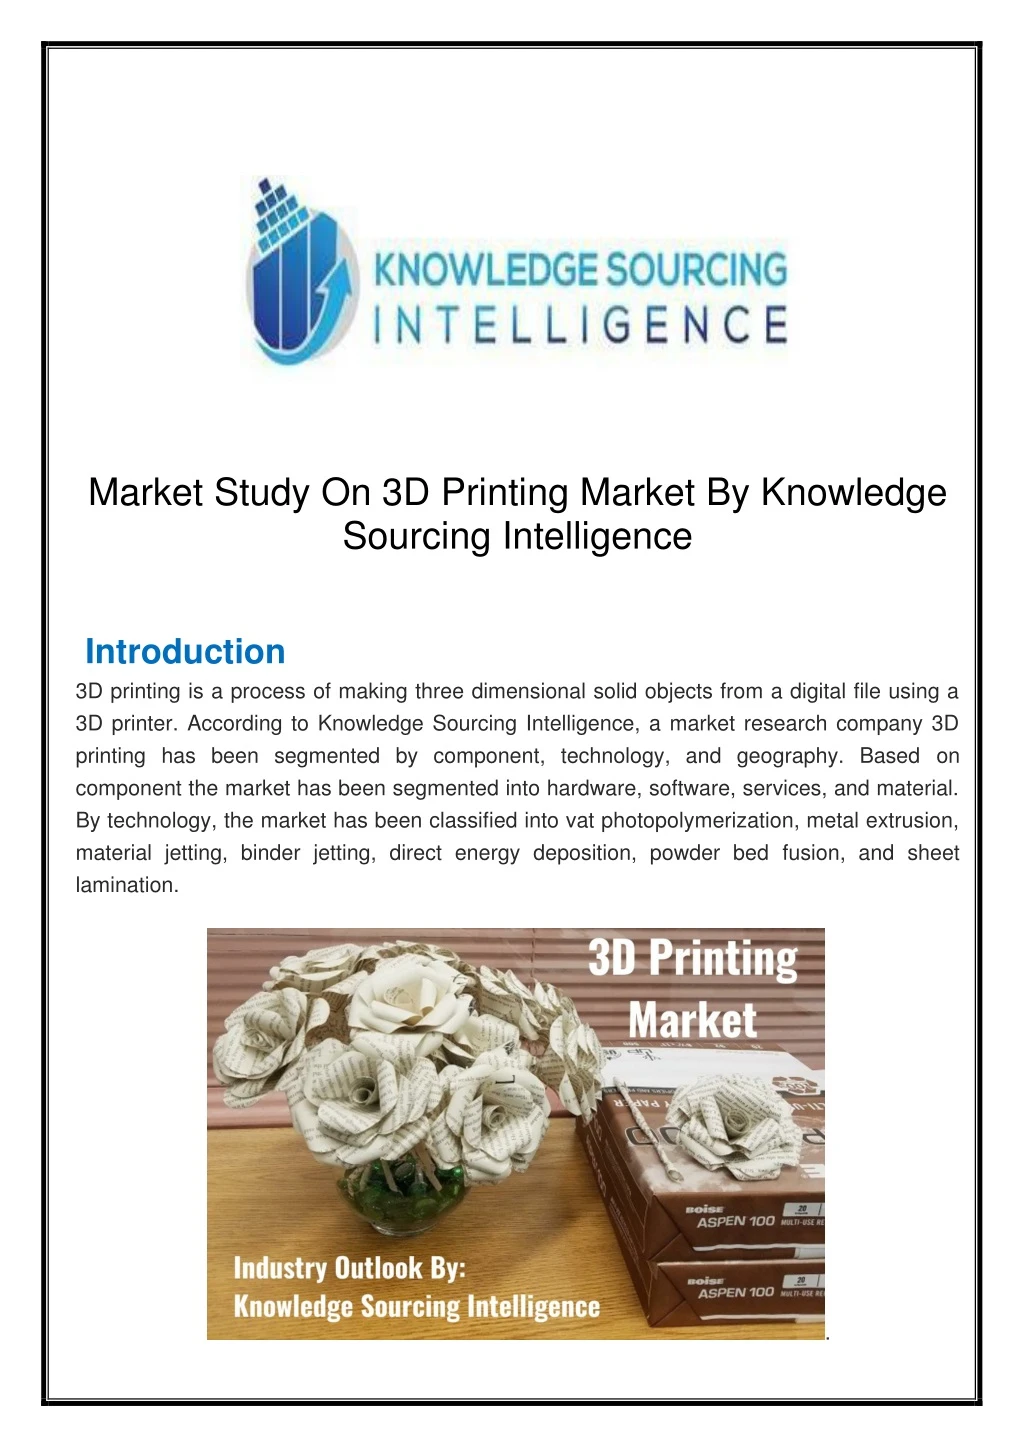 market study on 3d printing market by knowledge